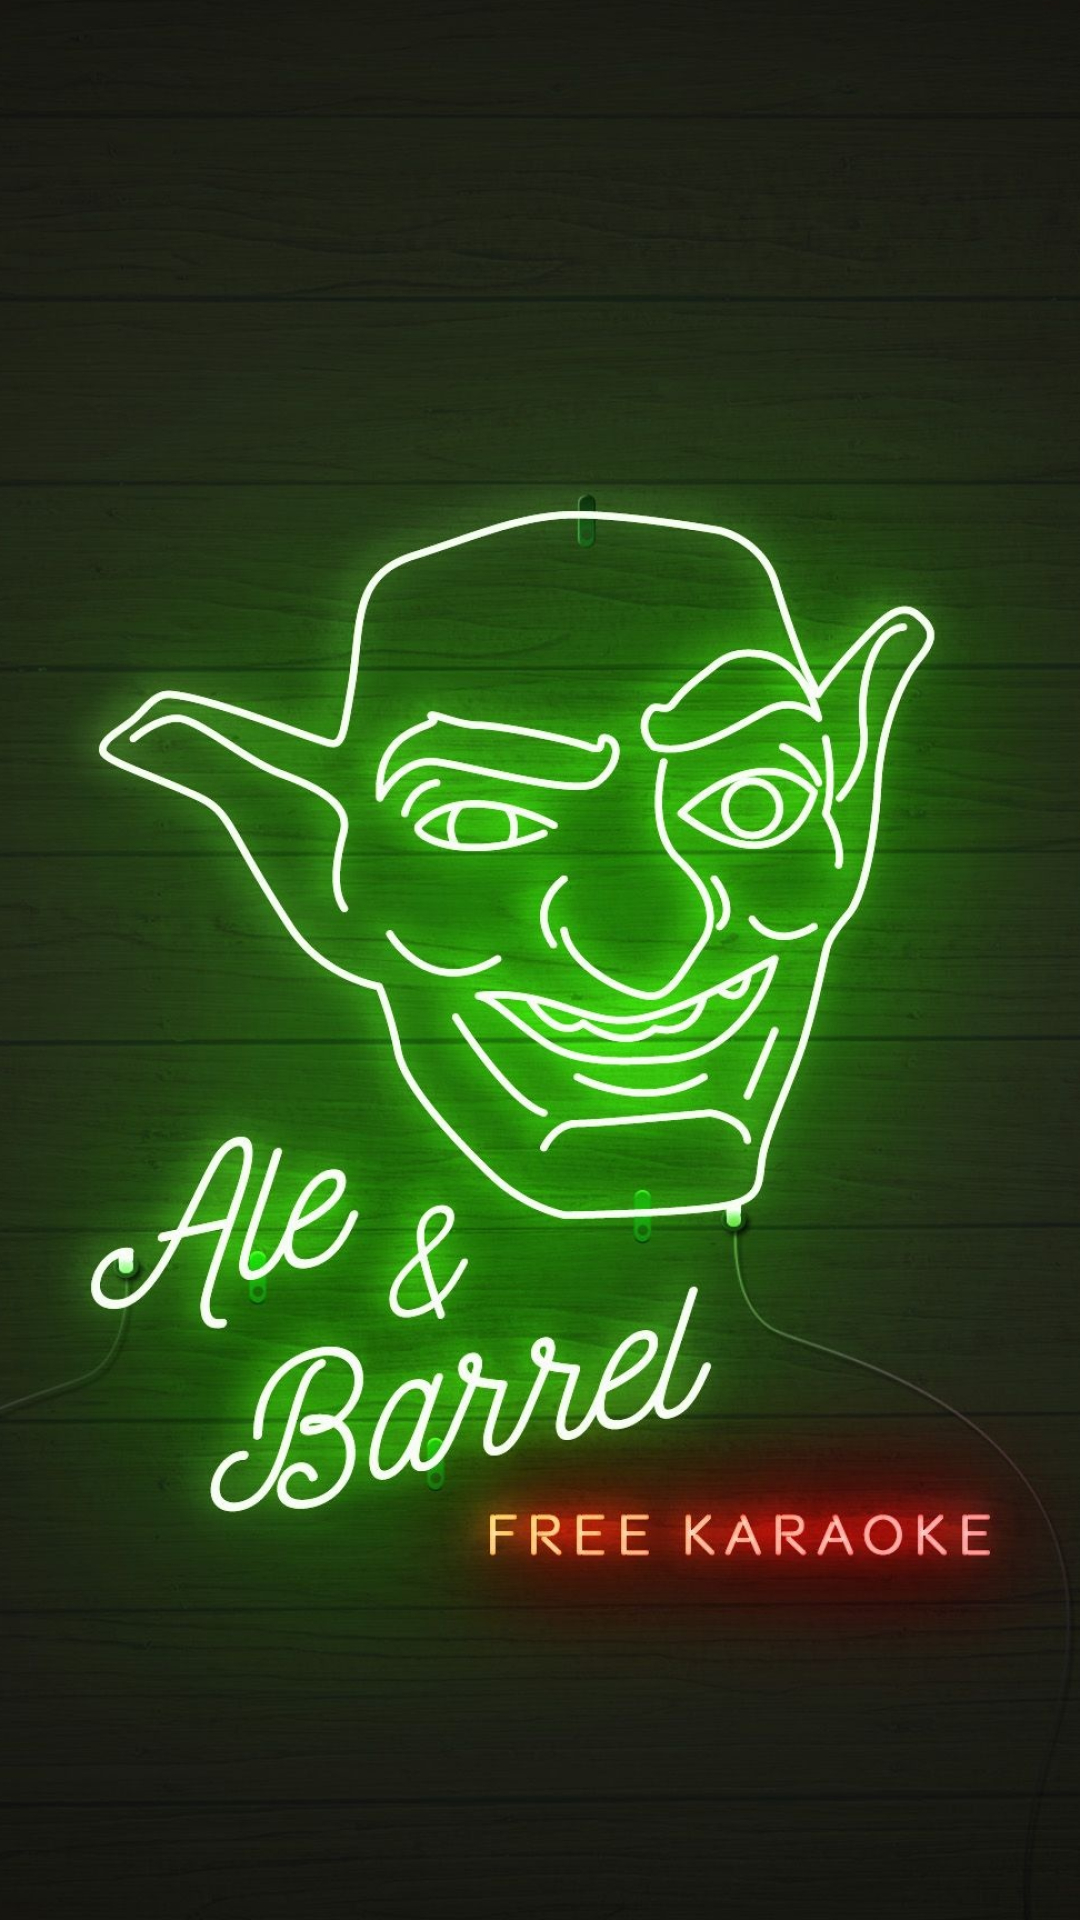 Karaoke: Ale and Barrel, Clash Royale, Singing to an instrumental version of a song. 1080x1920 Full HD Background.